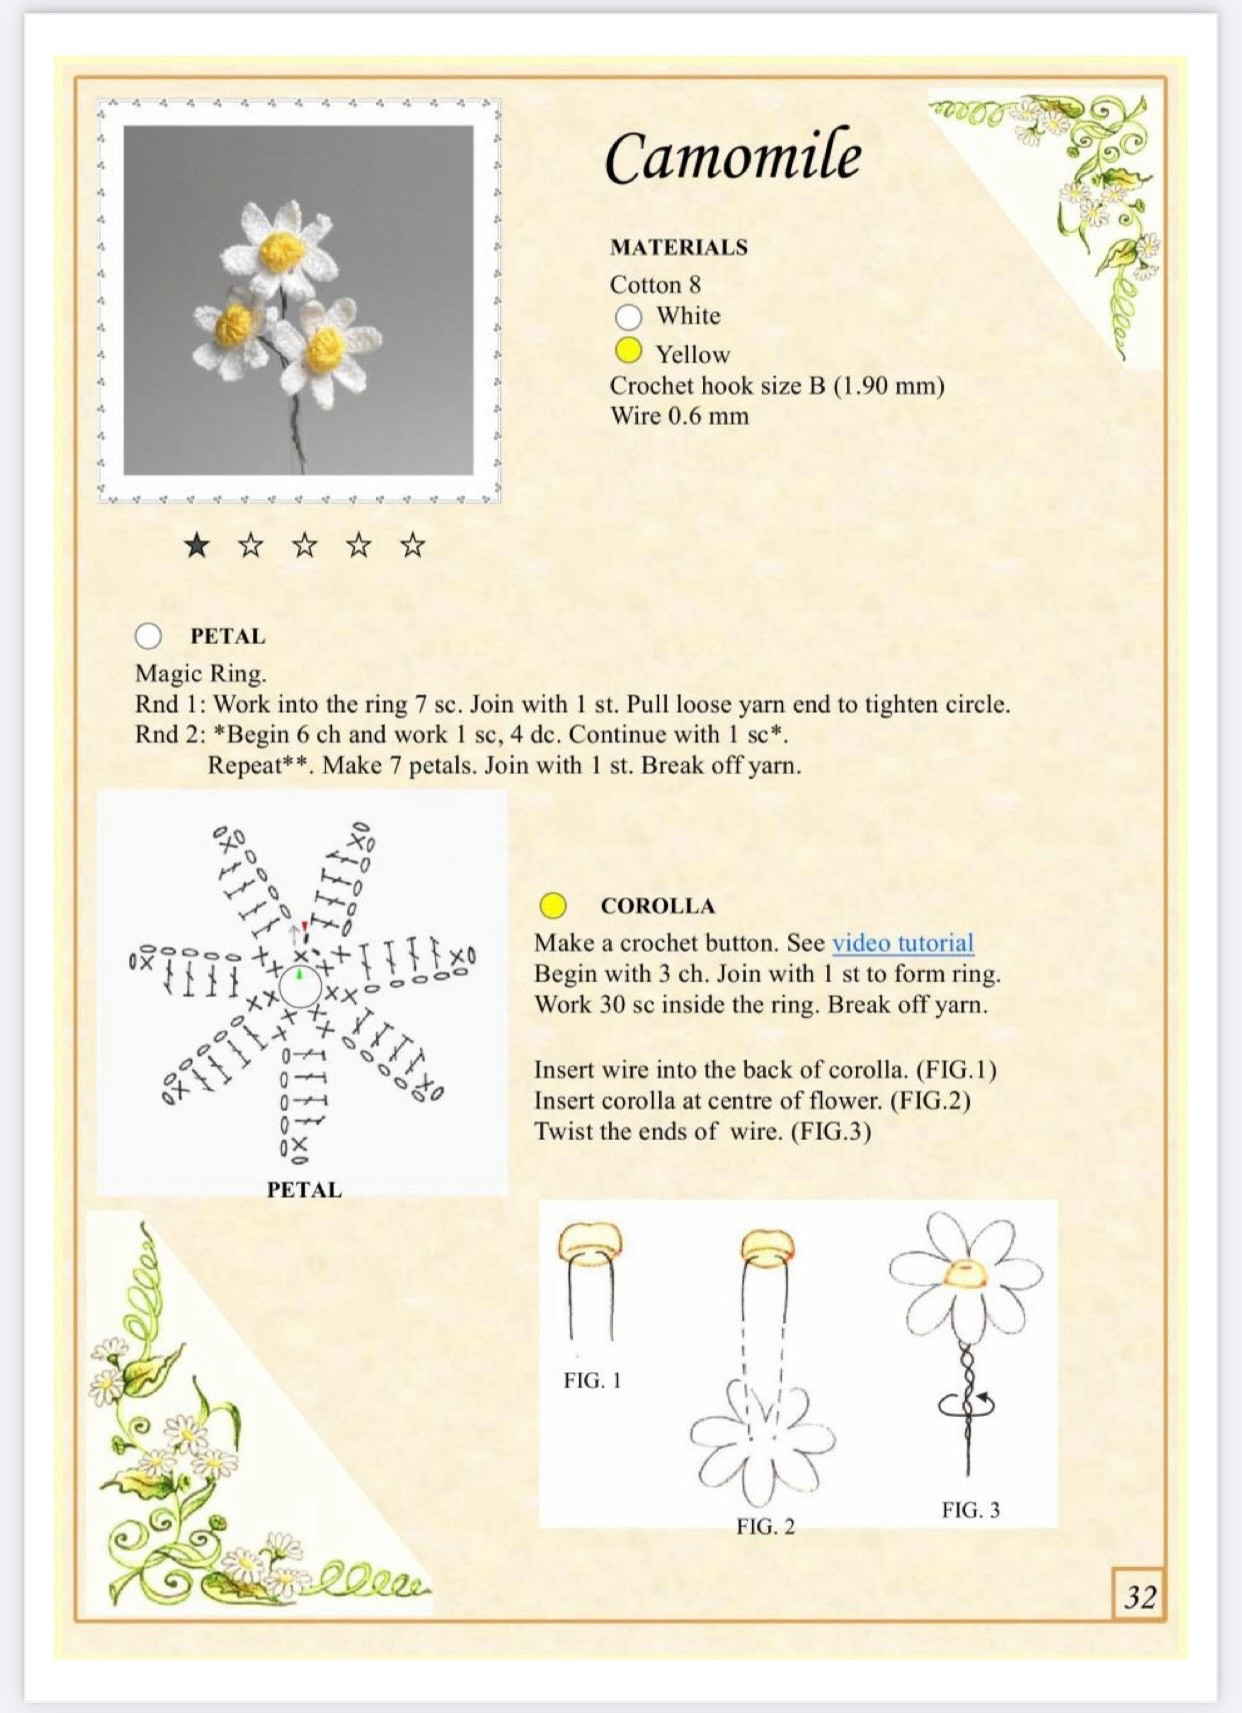 Crochet pattern Collection of crochet patterns for 10 types of flowers: calla lily, little rose, pansy, camomile, forget me not, bud, unopened bud, leaf, decorative curl